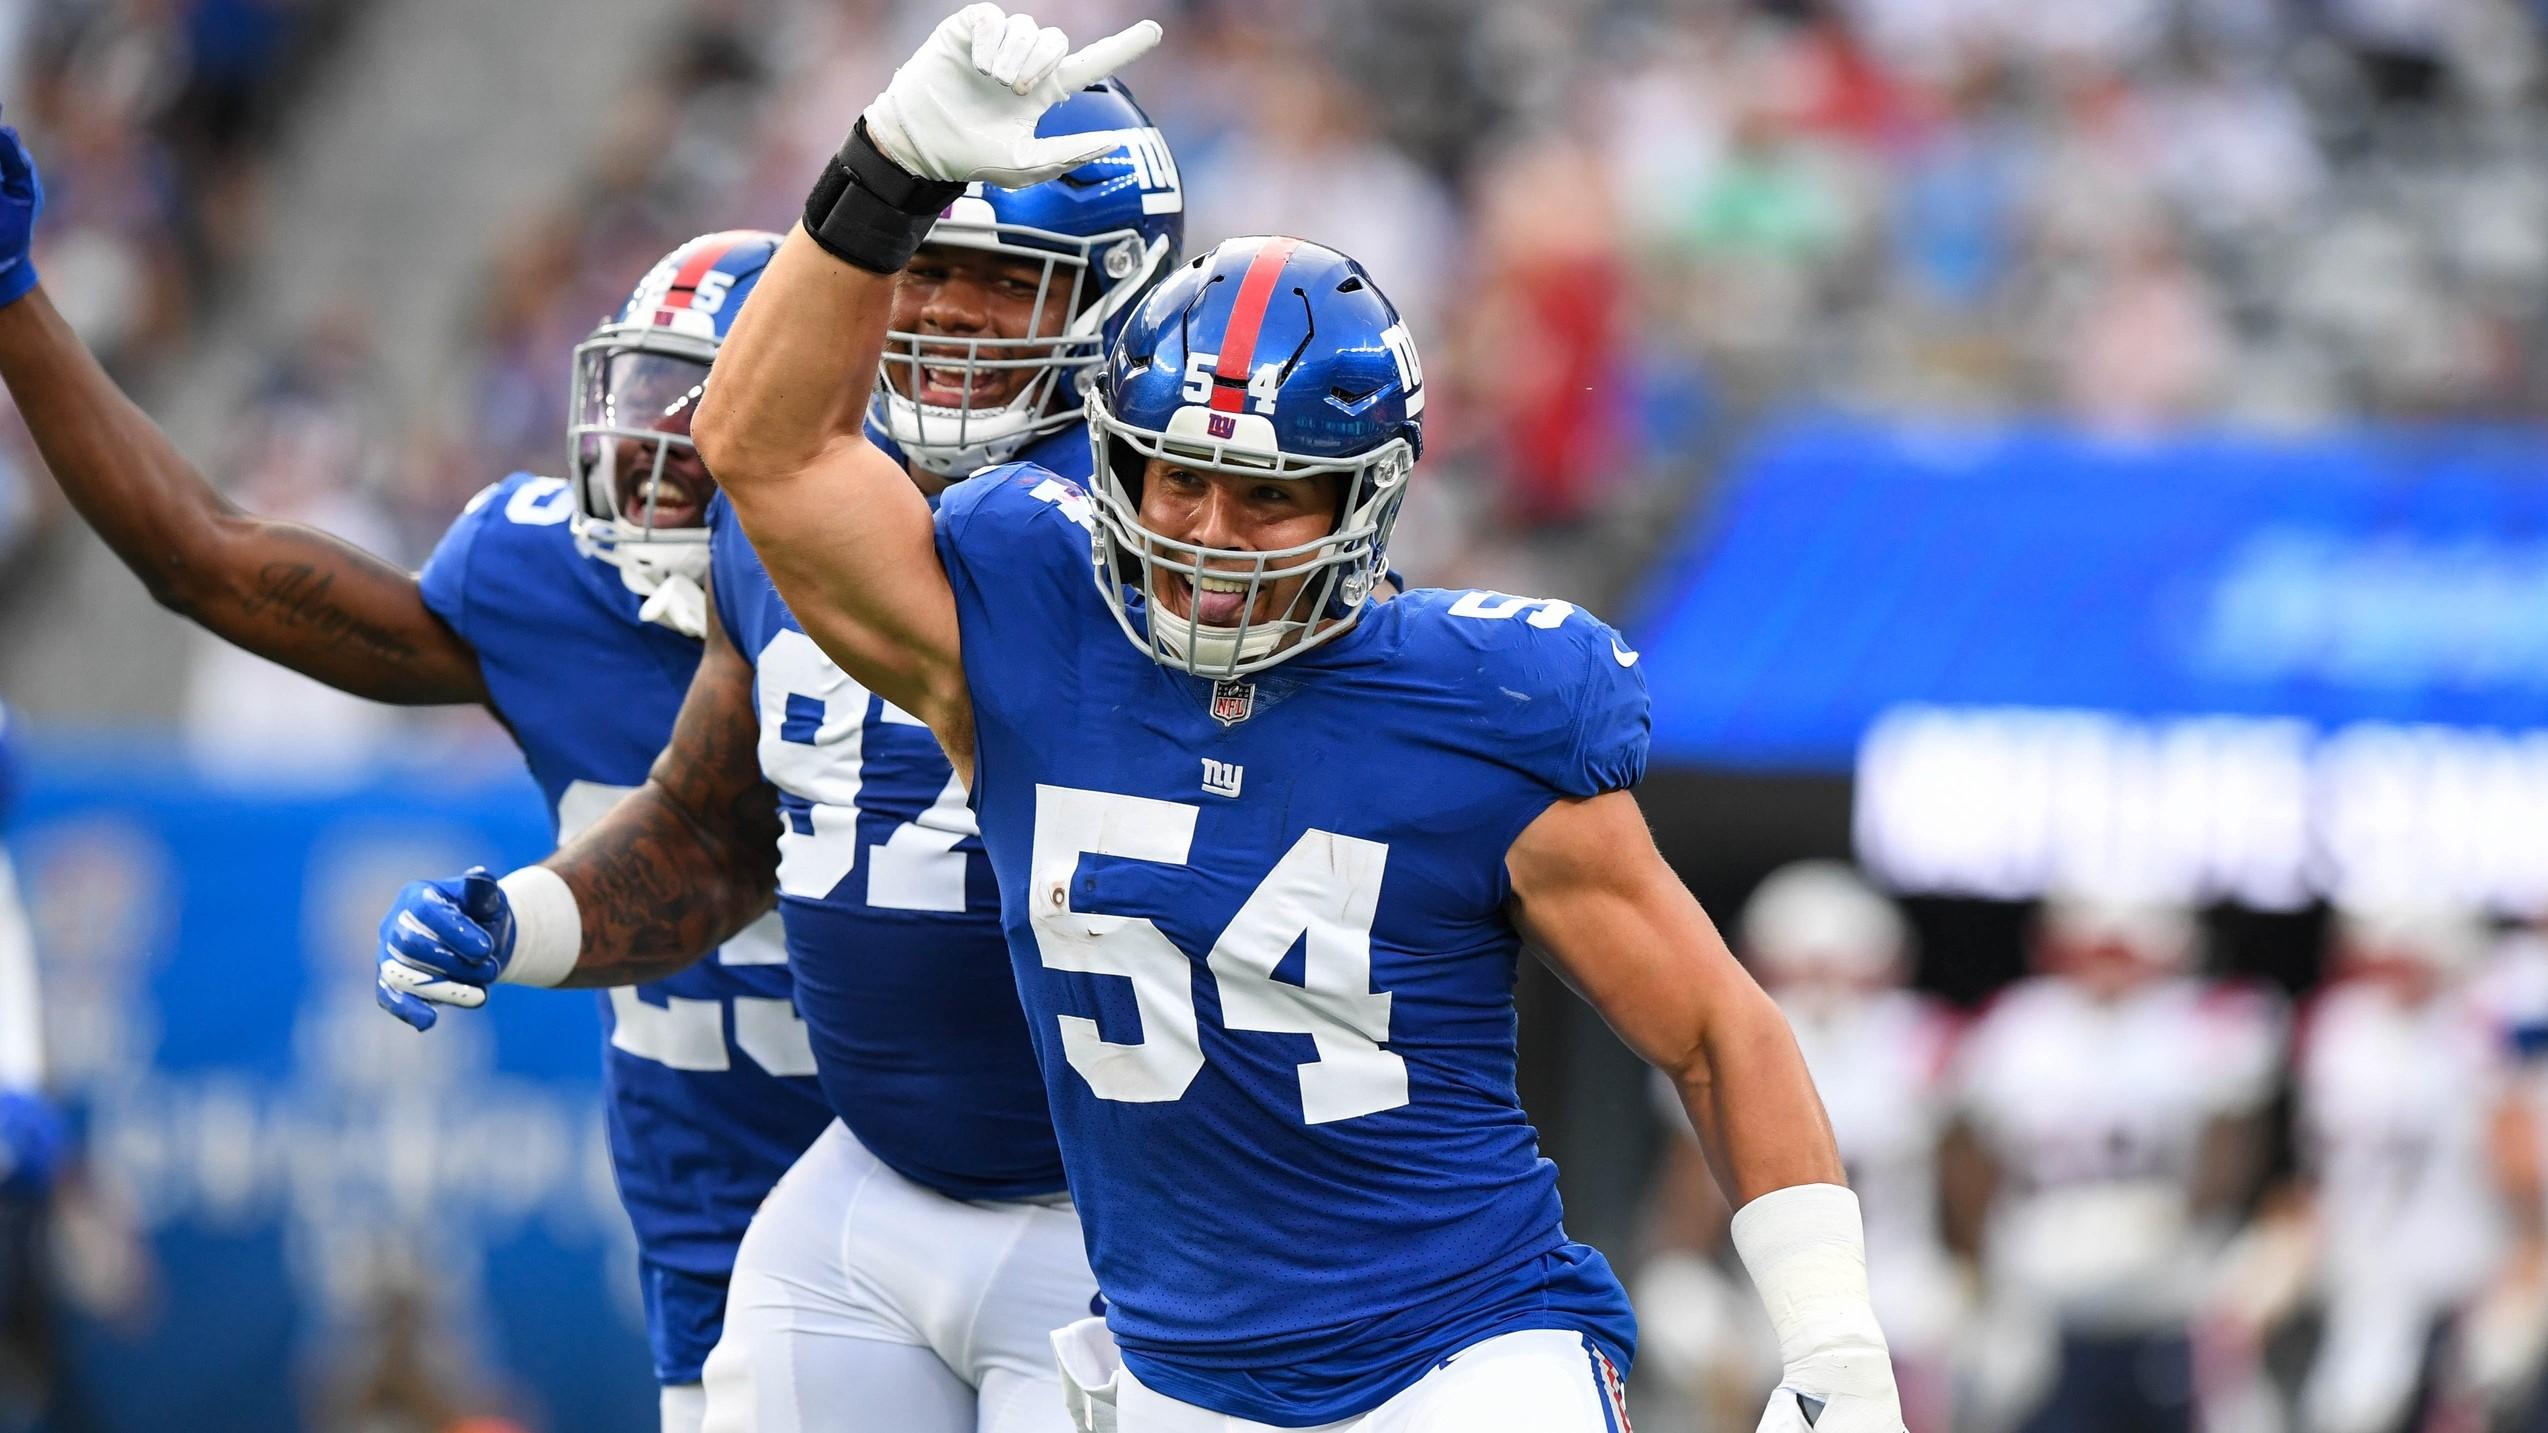 Aug 29, 2021; East Rutherford, New Jersey, USA; New York Giants inside linebacker Blake Martinez (54) celebrate his turnover against the New England Patriots at MetLife Stadium. / Dennis Schneidler-USA TODAY Sports